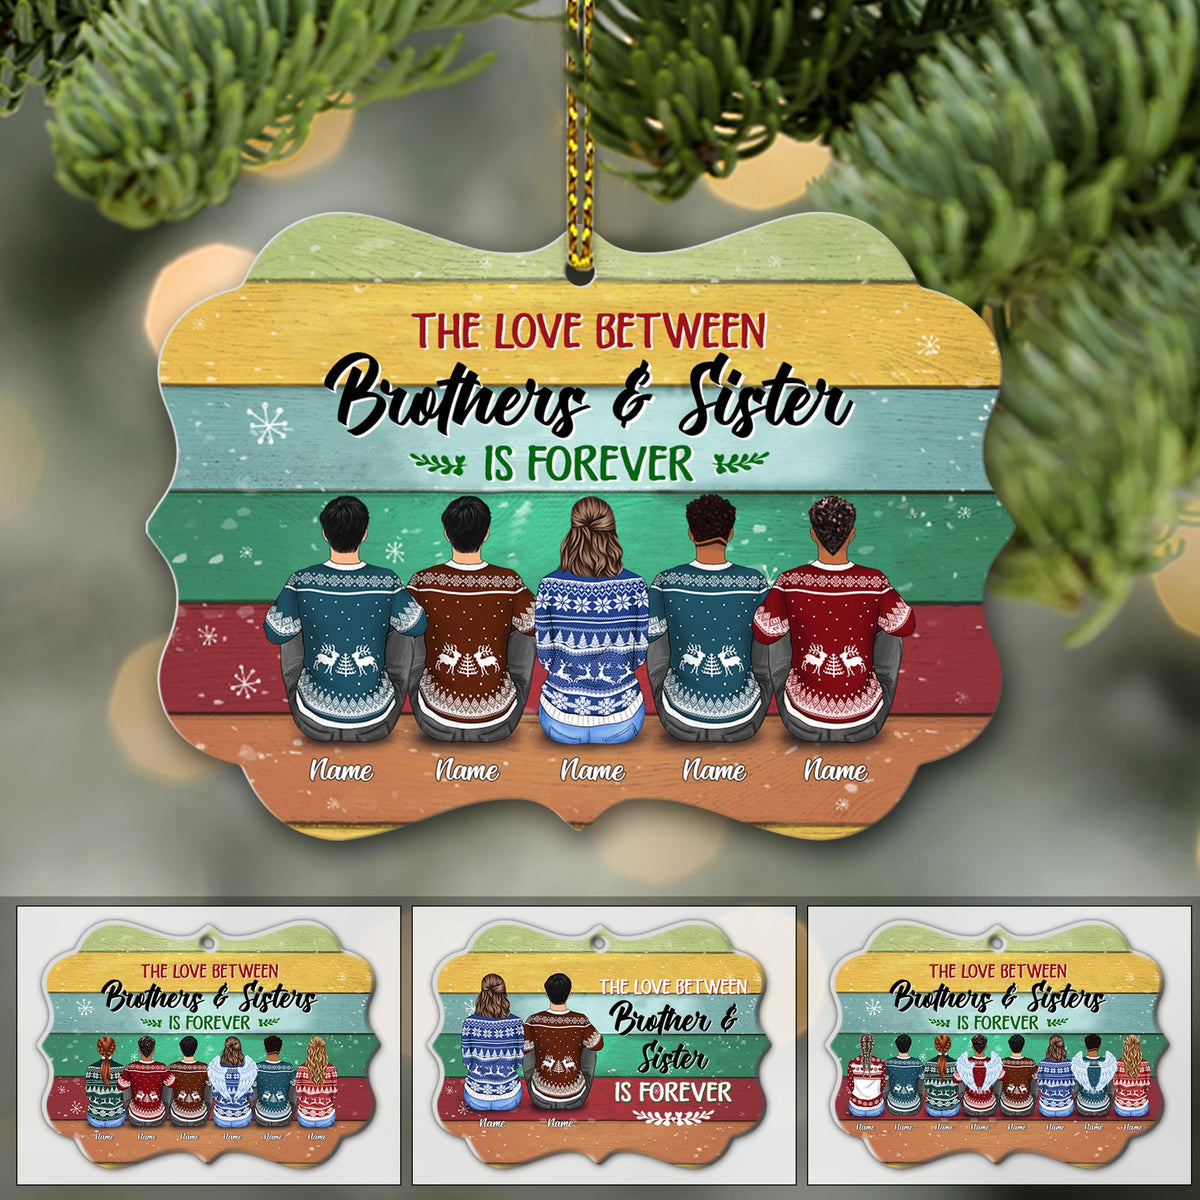 Unique Sister Gifts,Gifts For Sisters From Sisters Brother,Happy Sister  Birthday Gift Ideas,Cute Acrylic 3.5x3.5 Inch Desk Decorations